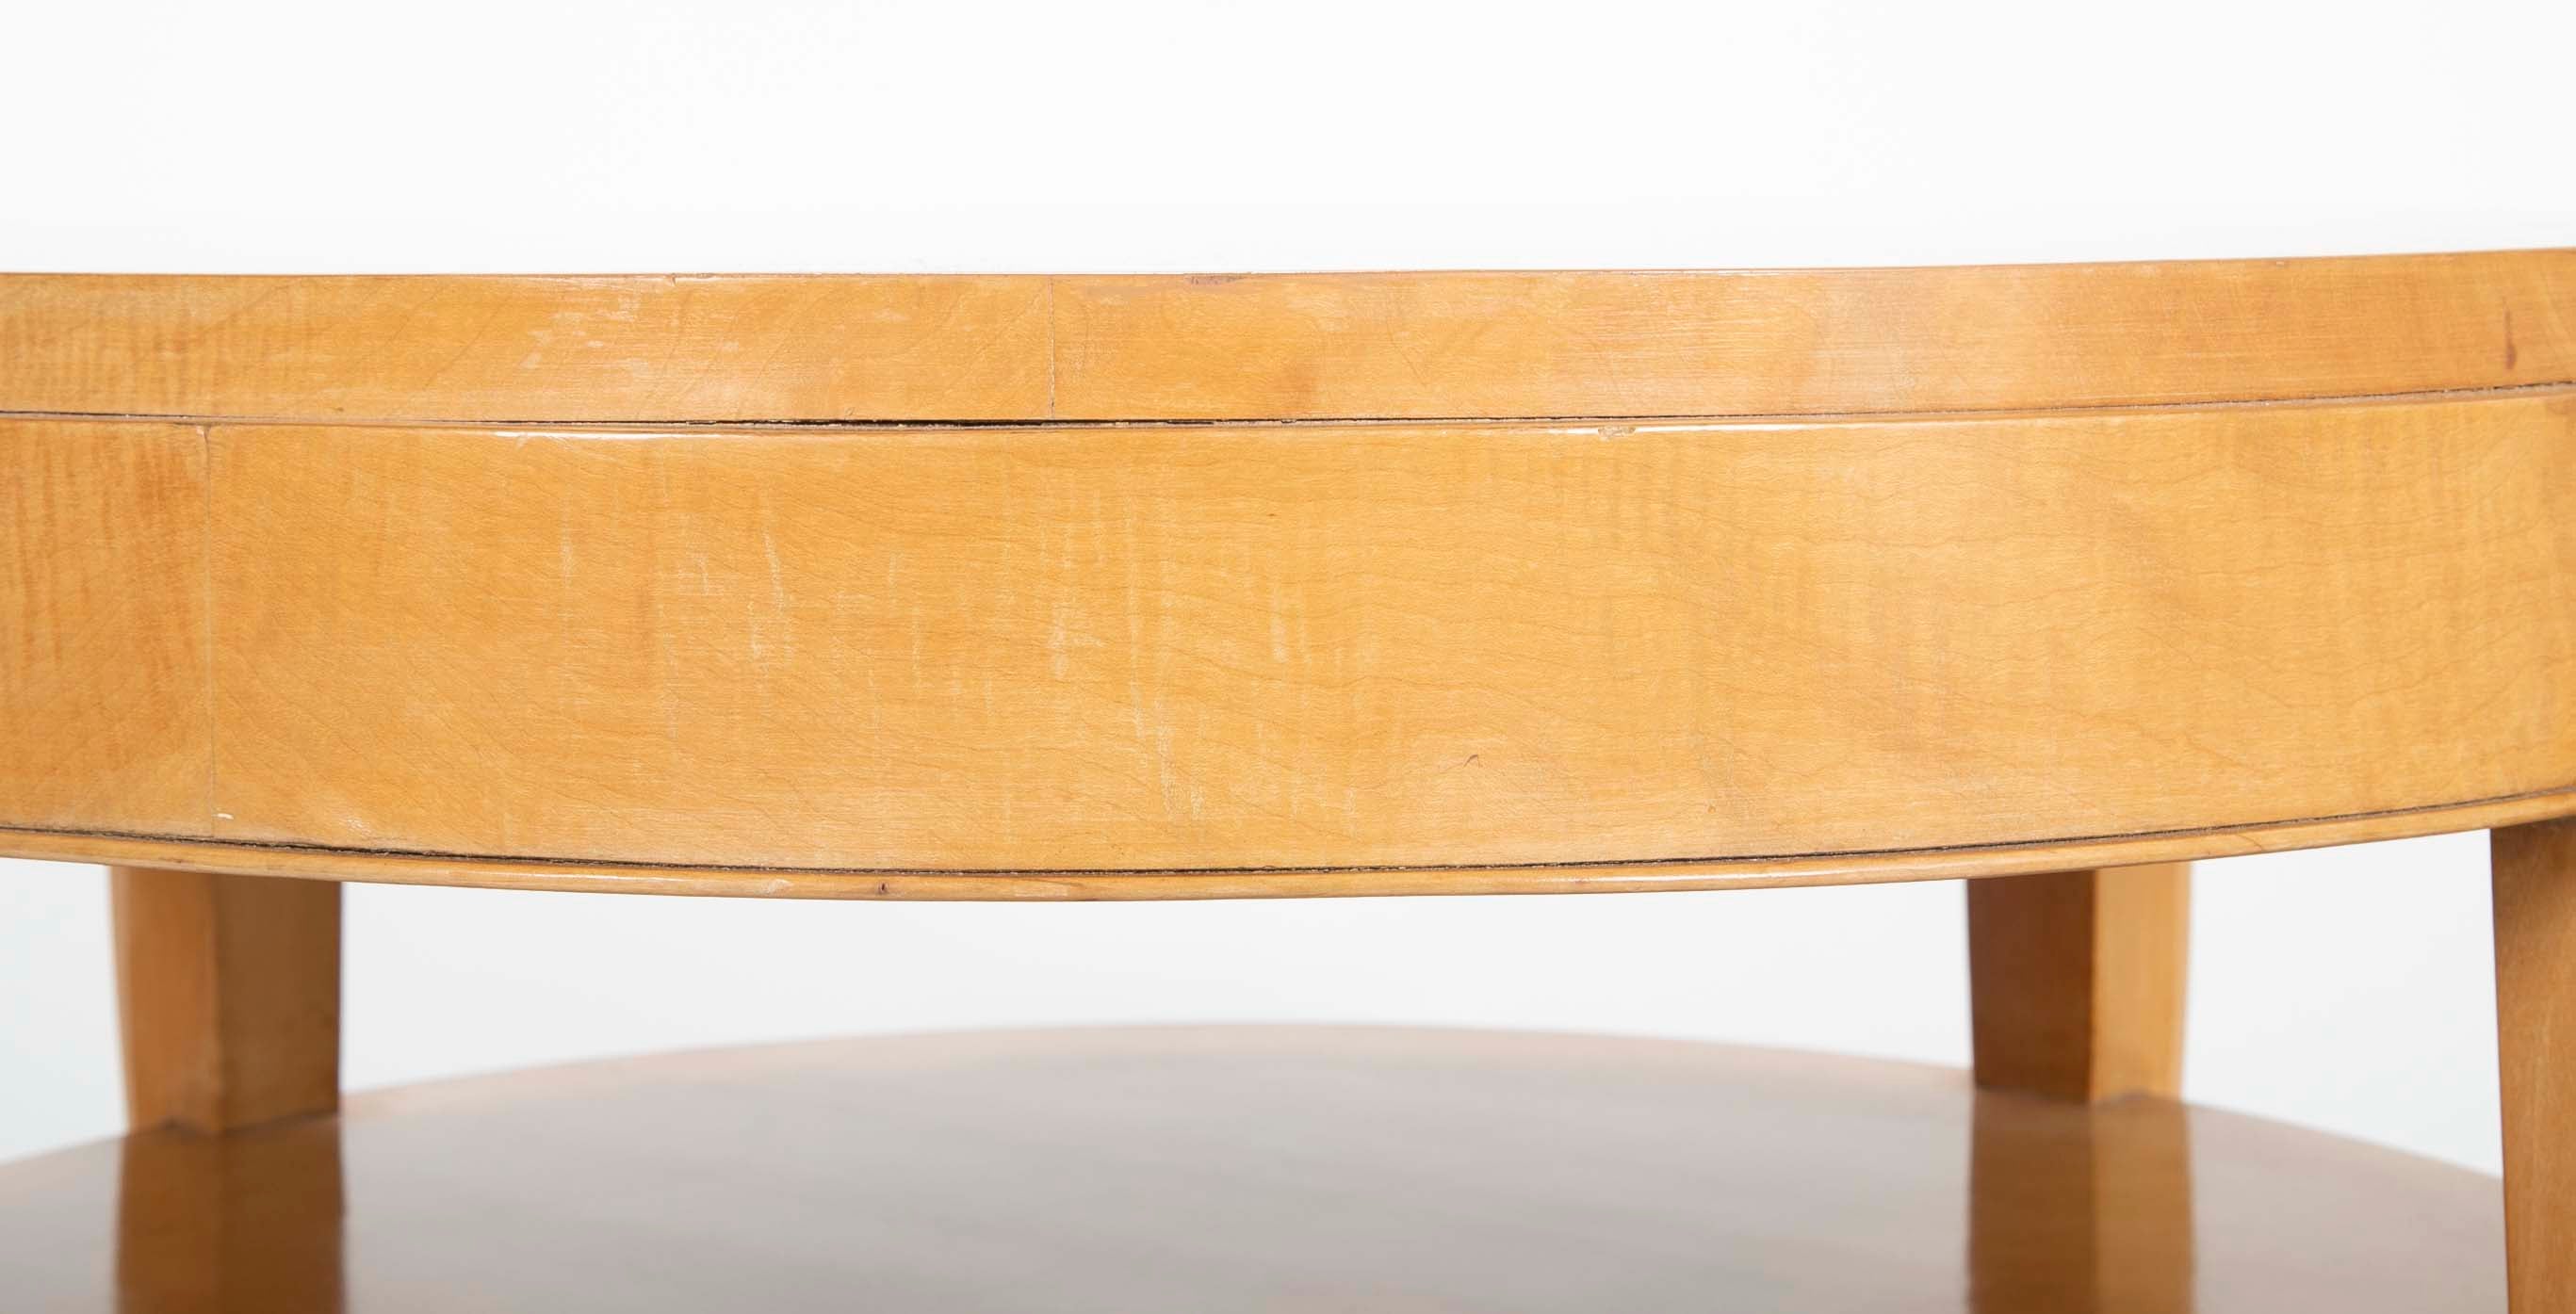 French Art Deco Sycamore Side Table